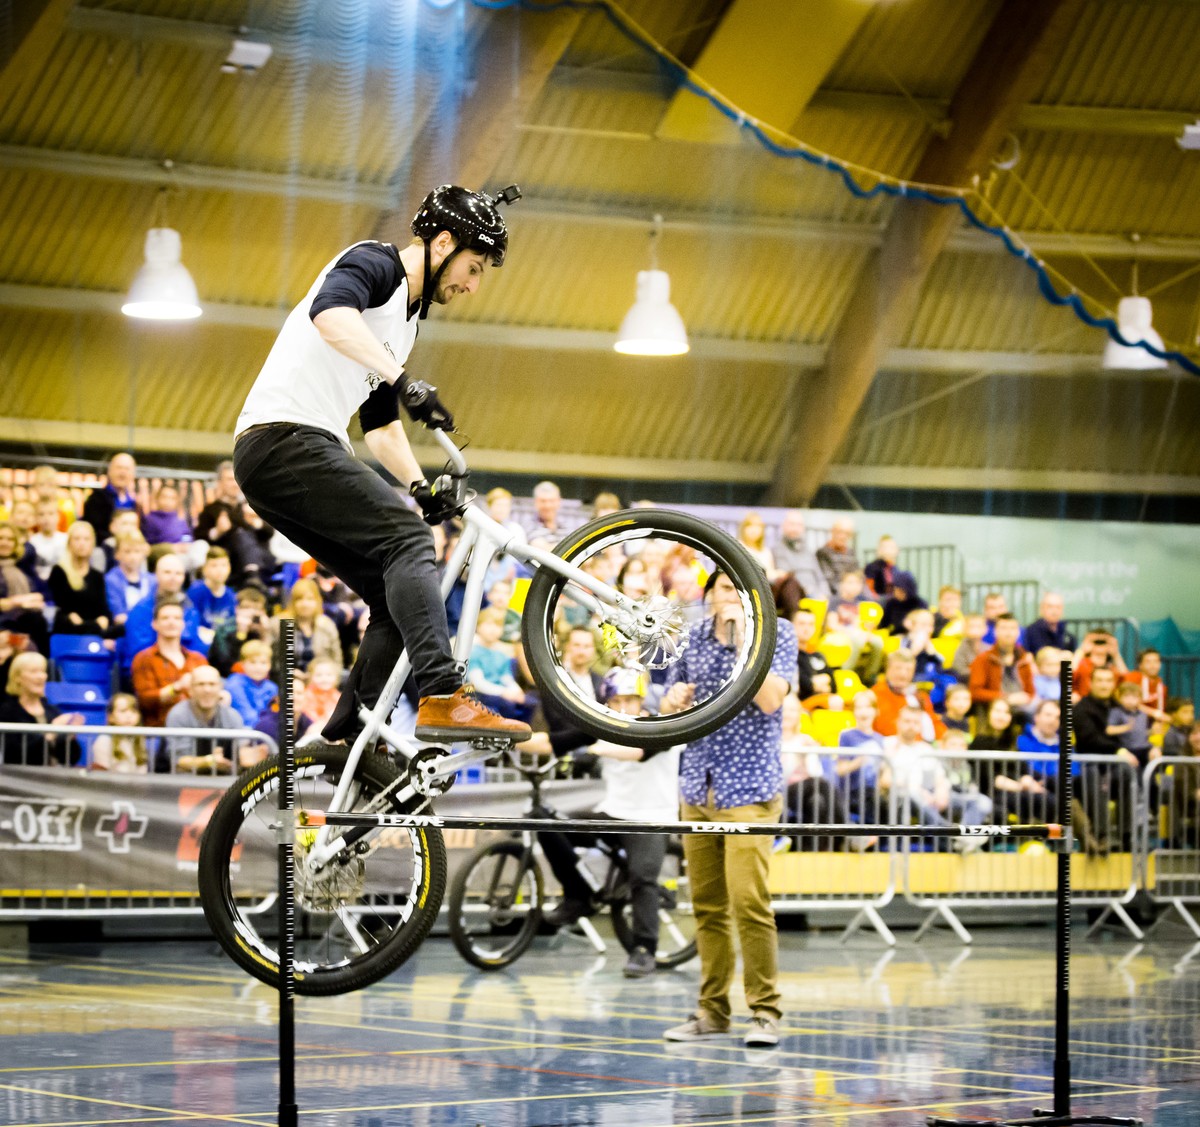 The Danny MacAskill Drop And Roll Tour was the highlight of Live Active Leisure's 50th Celebrations.